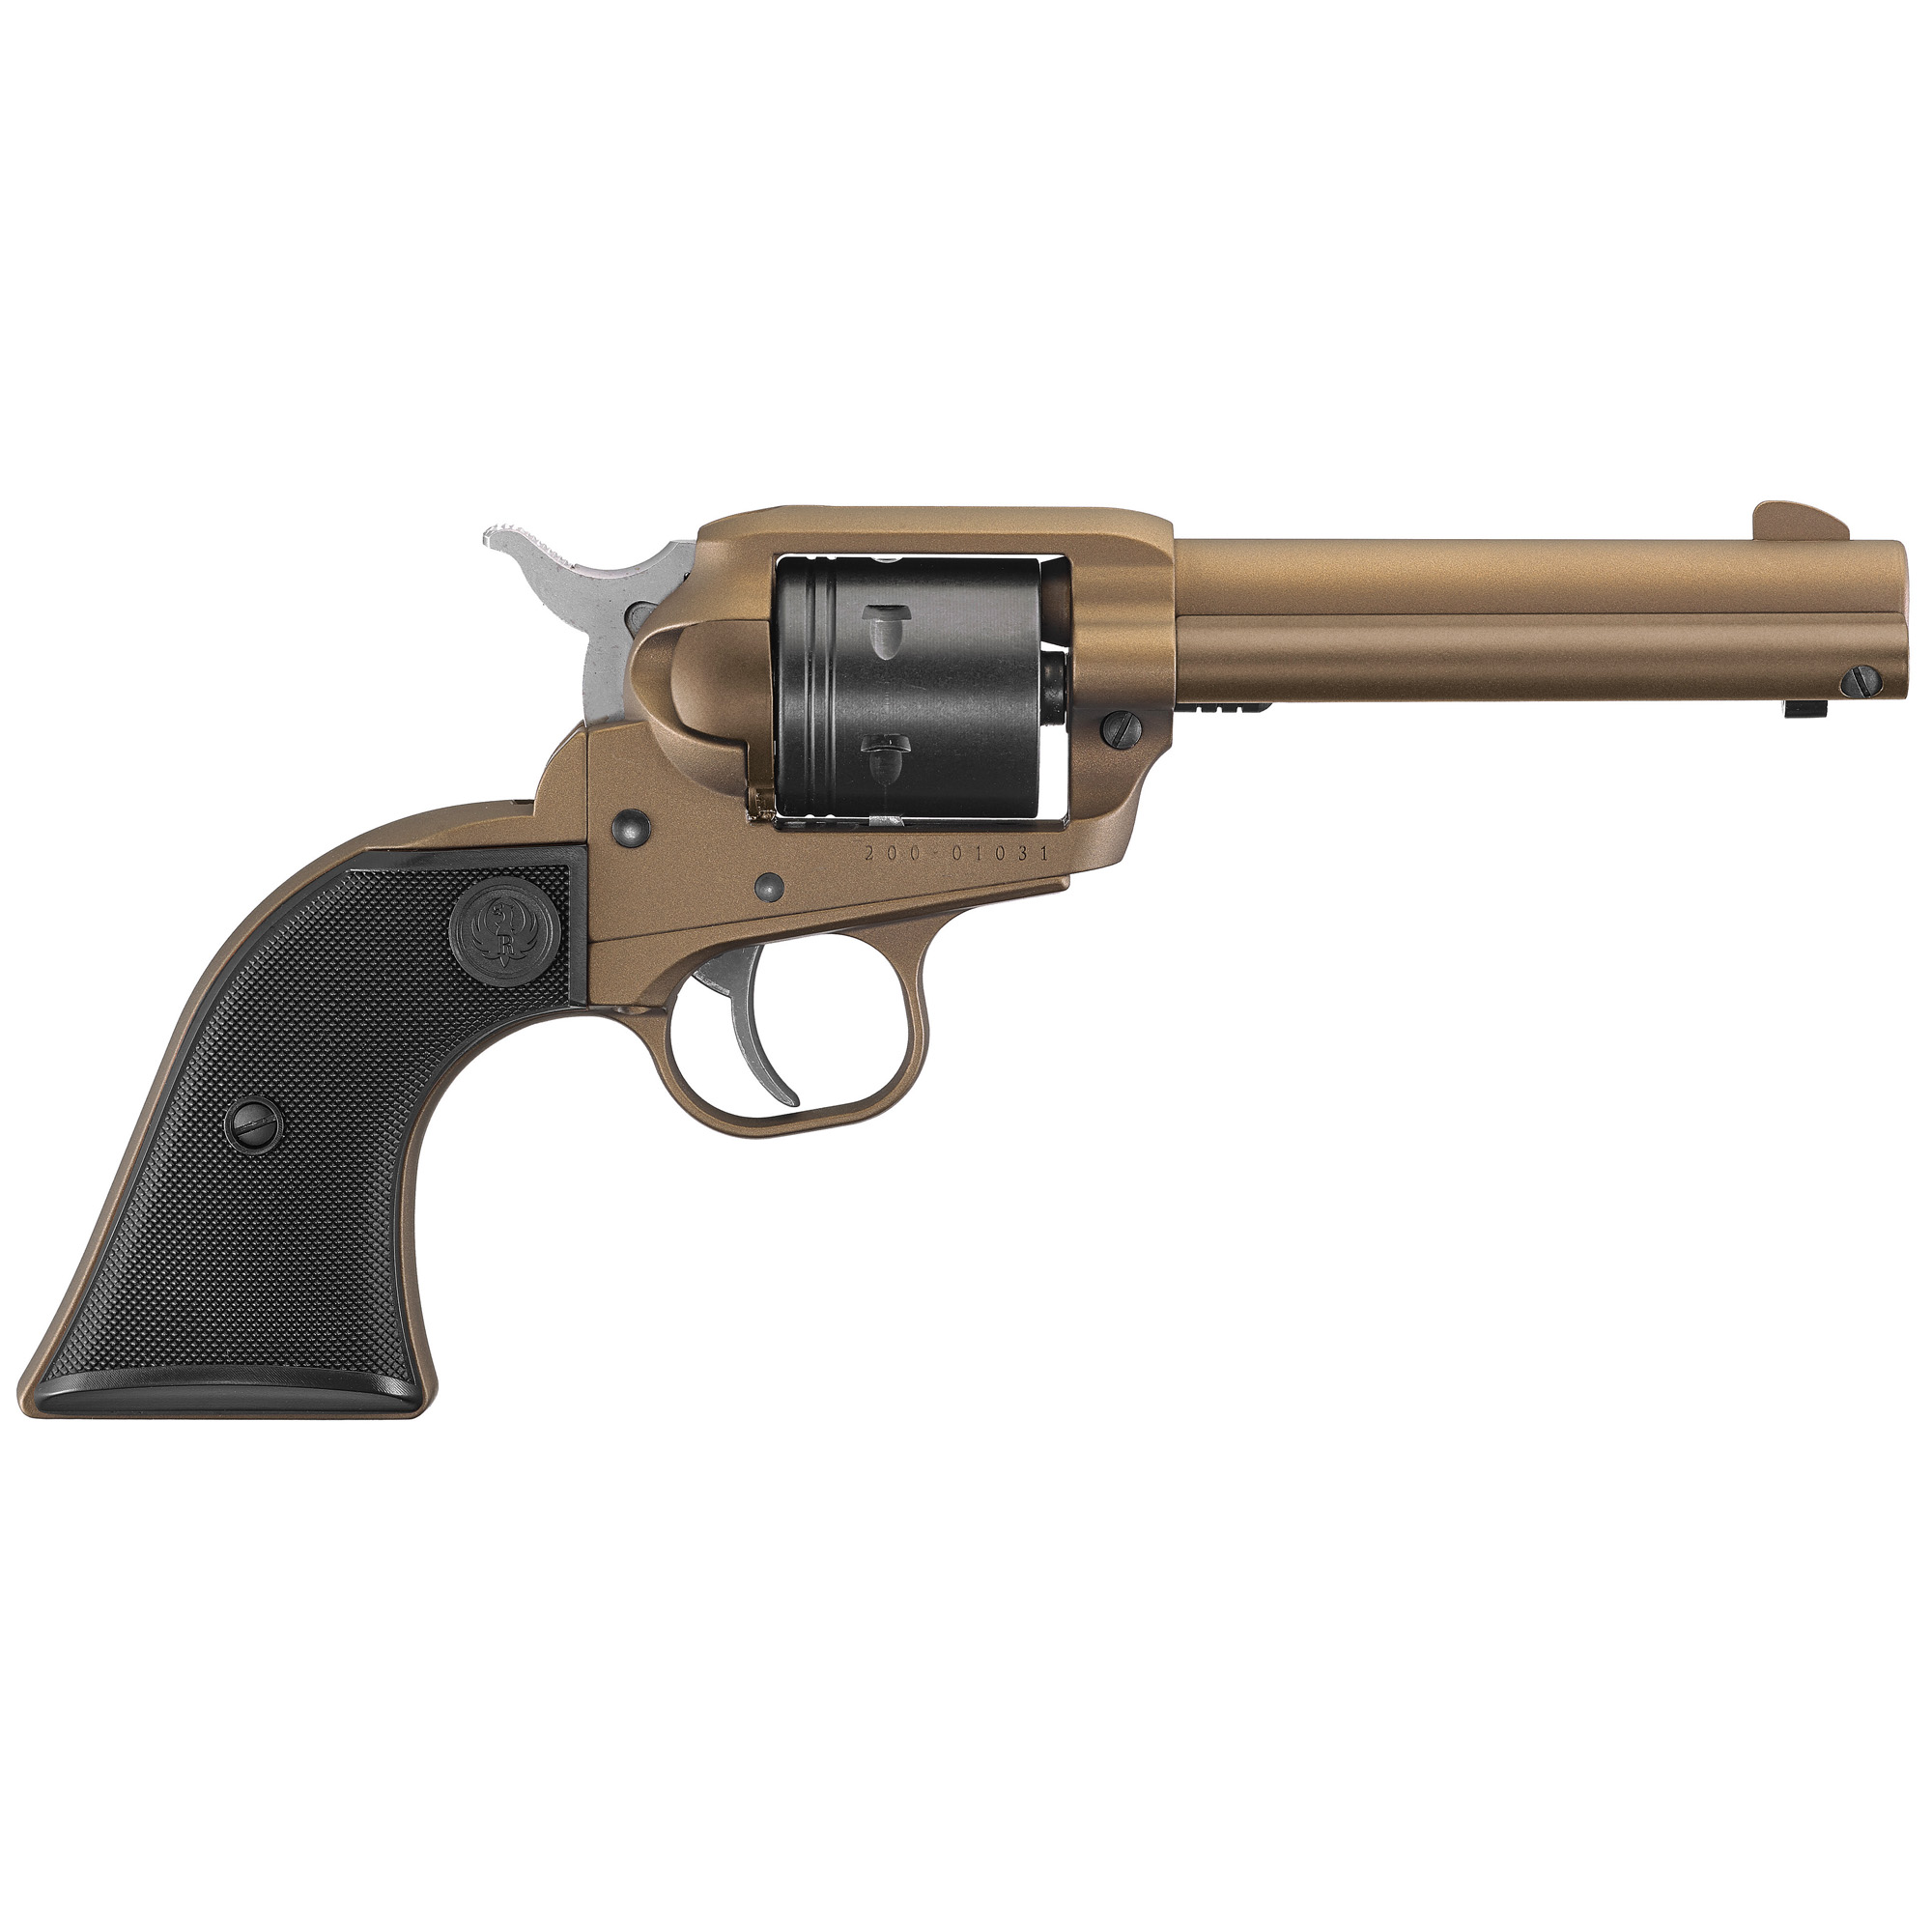 Ruger, Wrangler, Single Action Only, Revolver, 22LR, 4.62" Barrel, Aluminum Alloy, Cerakote Finish, Burnt Bronze, Checkered Synthetic Grips, Integral Notch Rear Sight/Blade Front Sight, Transfer Bar Safety, 6 Rounds